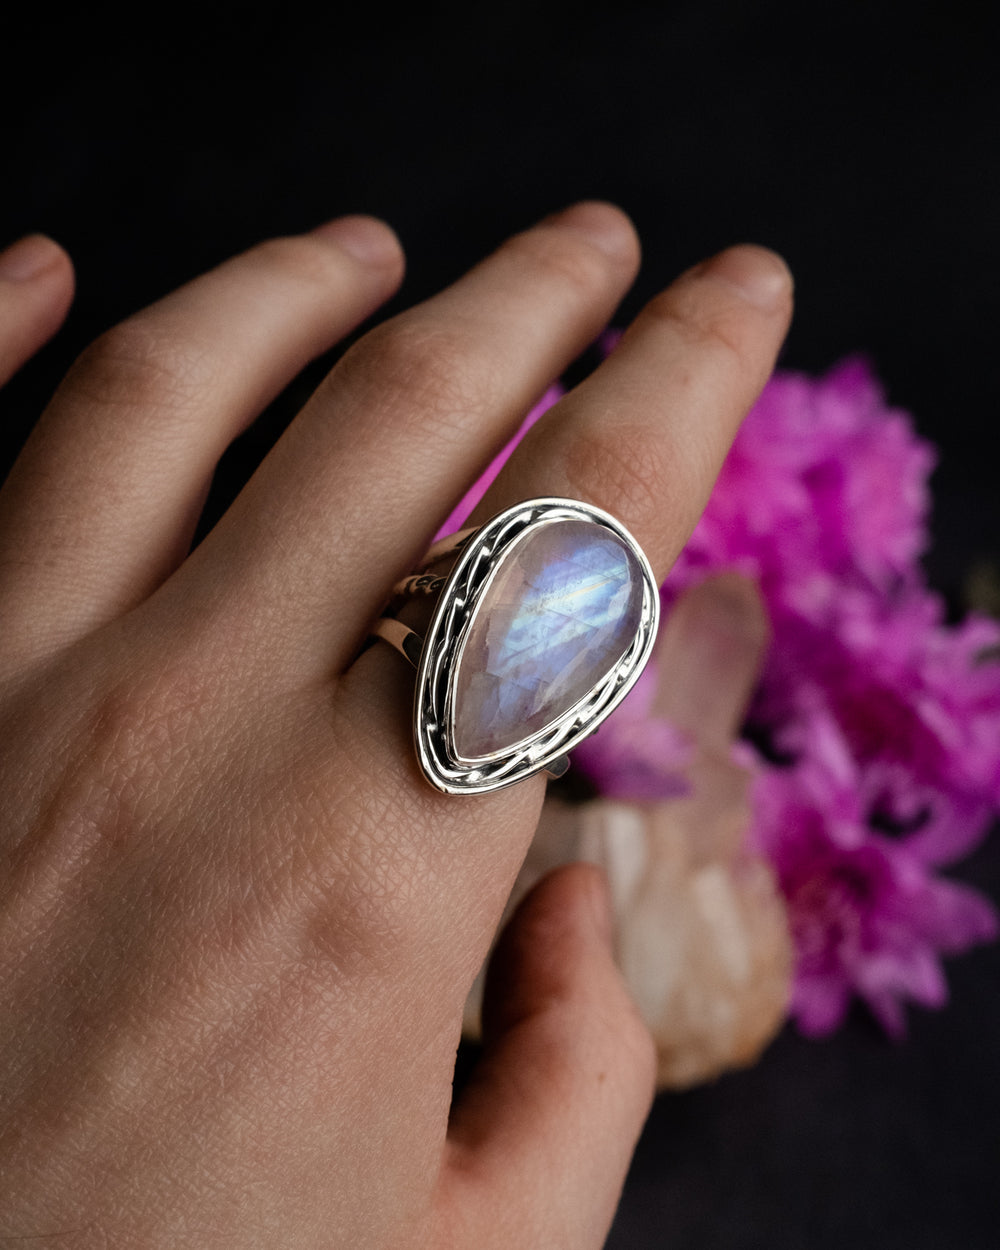 Pink Moonstone Twisted Teardrop Ring in Sterling Silver - Size 8 1/2 US / Q 3/4 UK - The Healing Pear